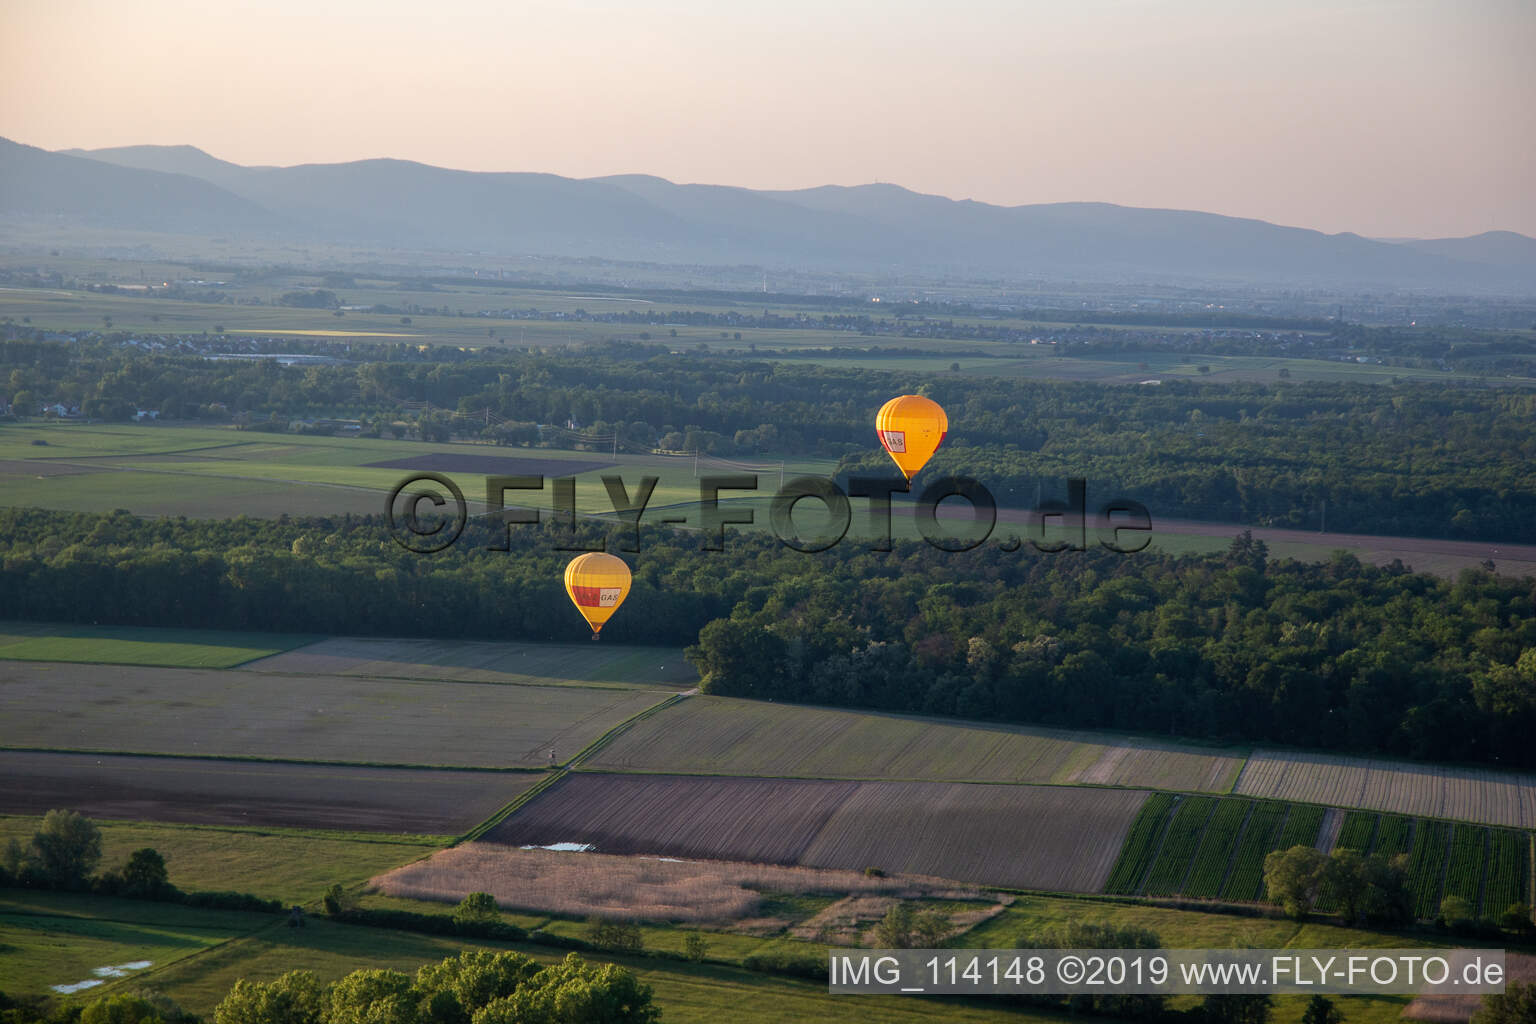 Pfalzgas twin balloons in Kandel in the state Rhineland-Palatinate, Germany